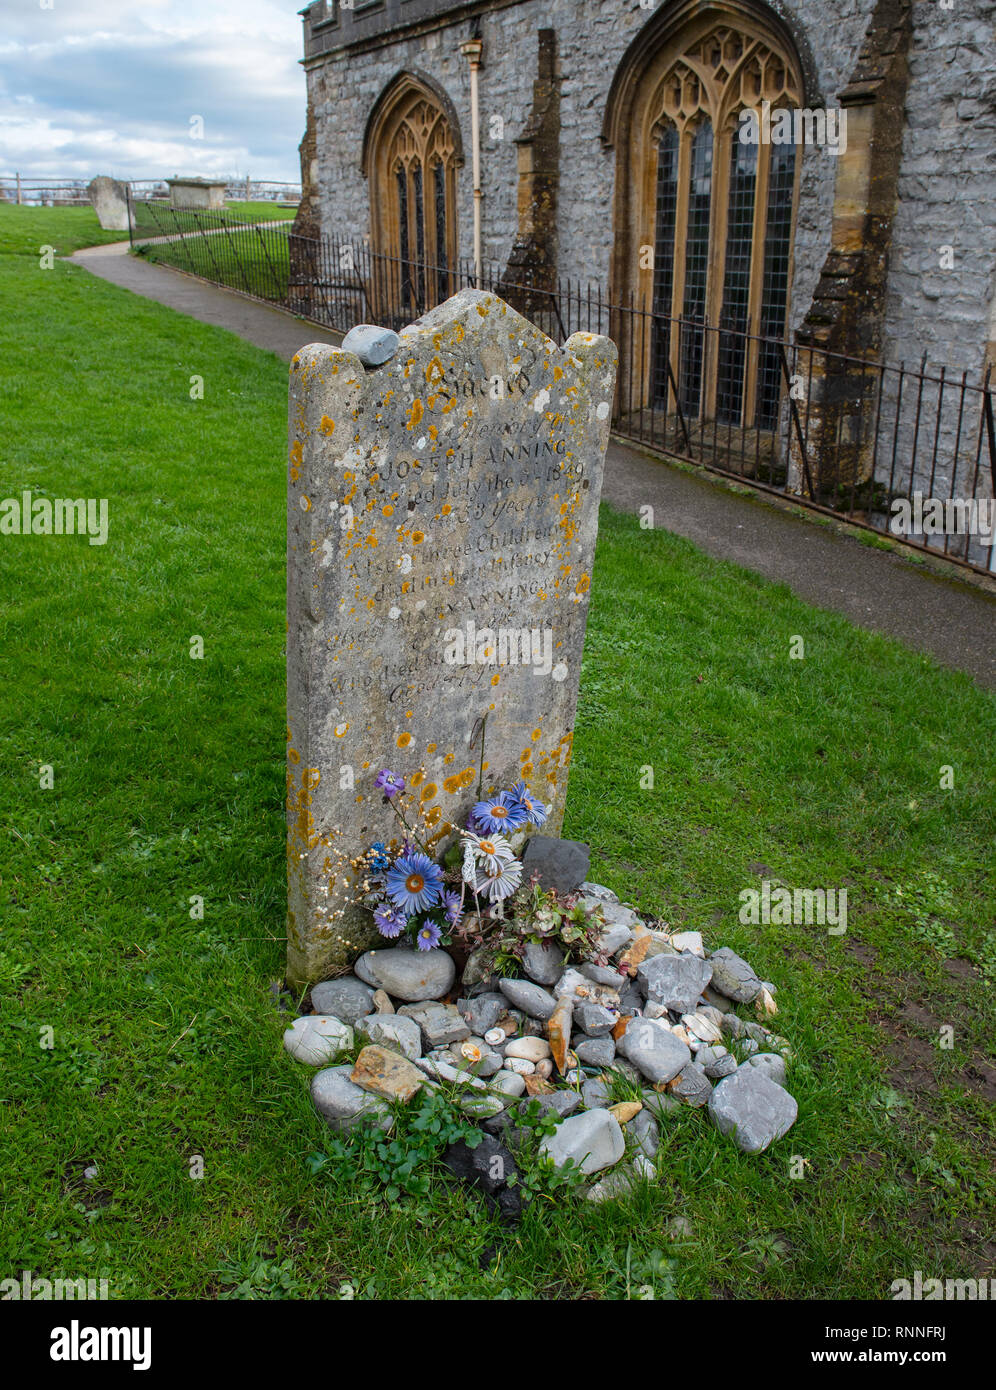 The original gravestone of Mary Anning before it was replaced in 2019. Visitors like to place fossils on the grave instead of flowers in her memory. Stock Photo